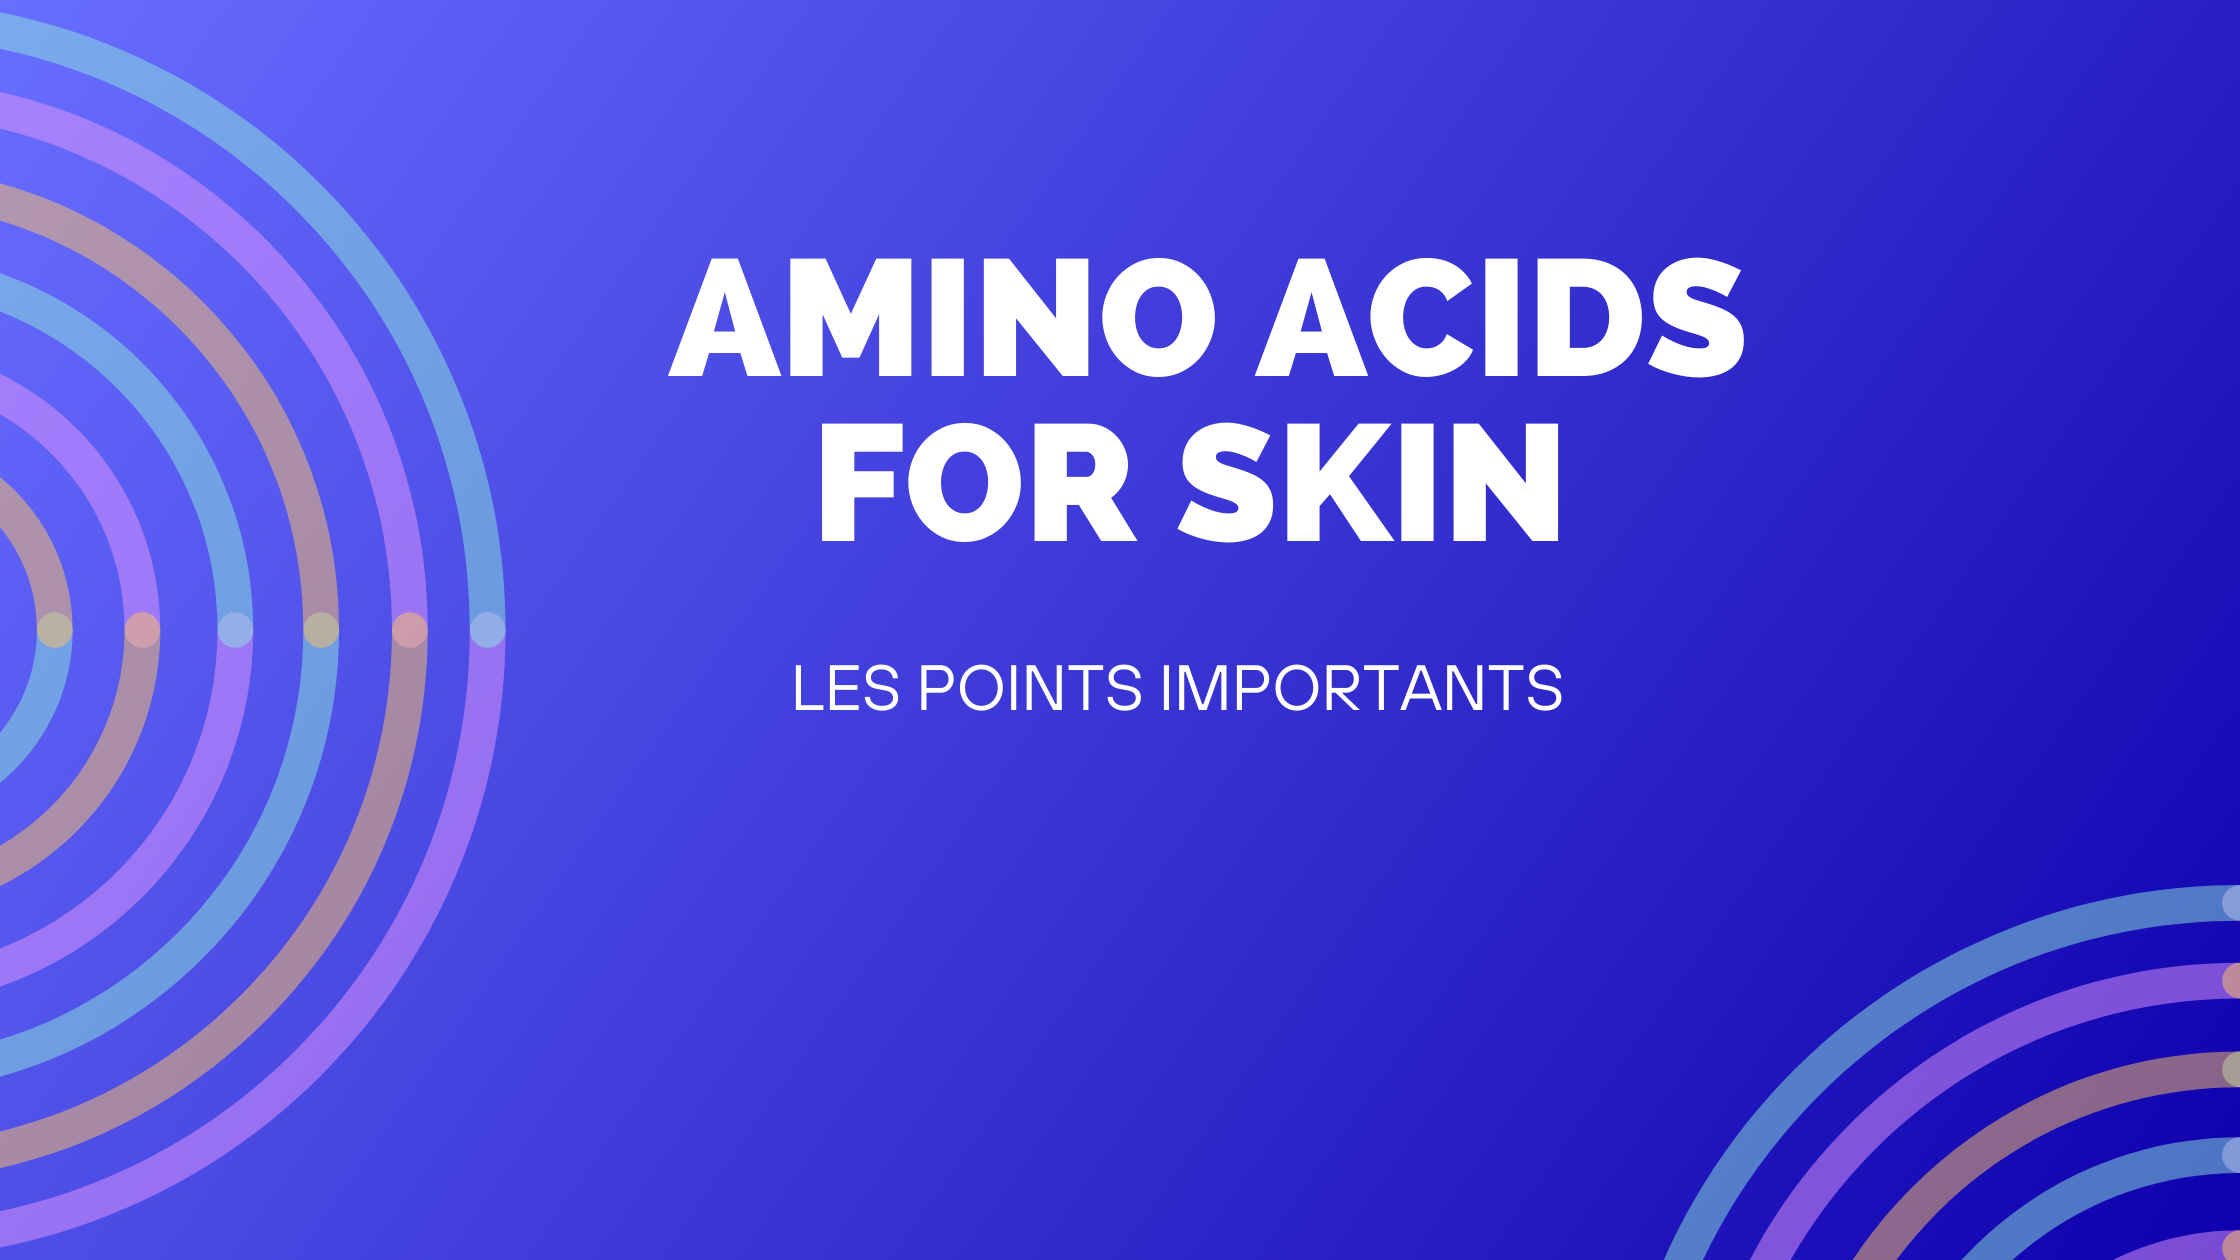 amino acids for skin | Les points importants